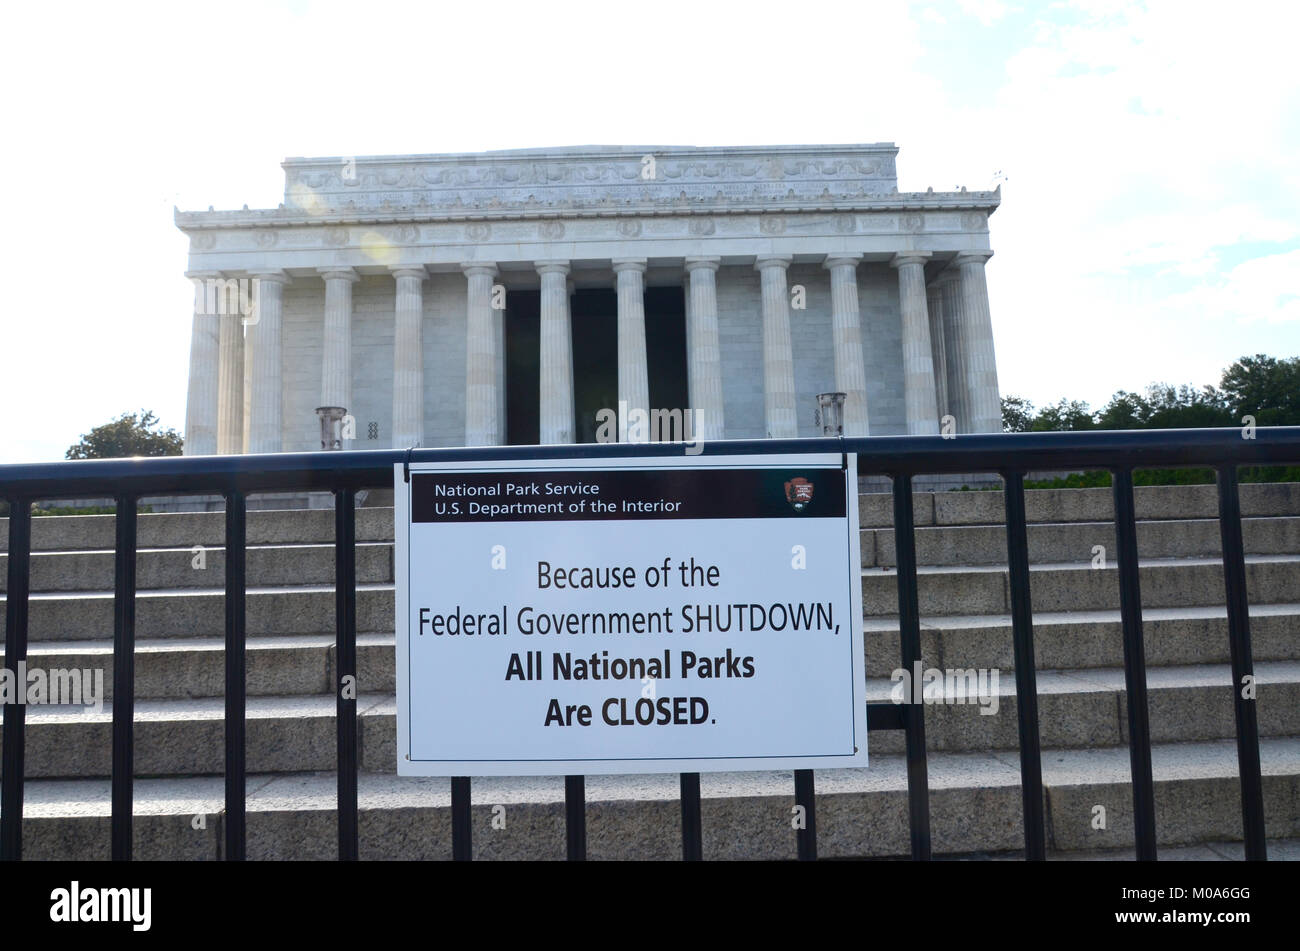 National monuments and museums in Washington DC were closed during the U.S. governemnt shutdown in 2013. Stock Photo